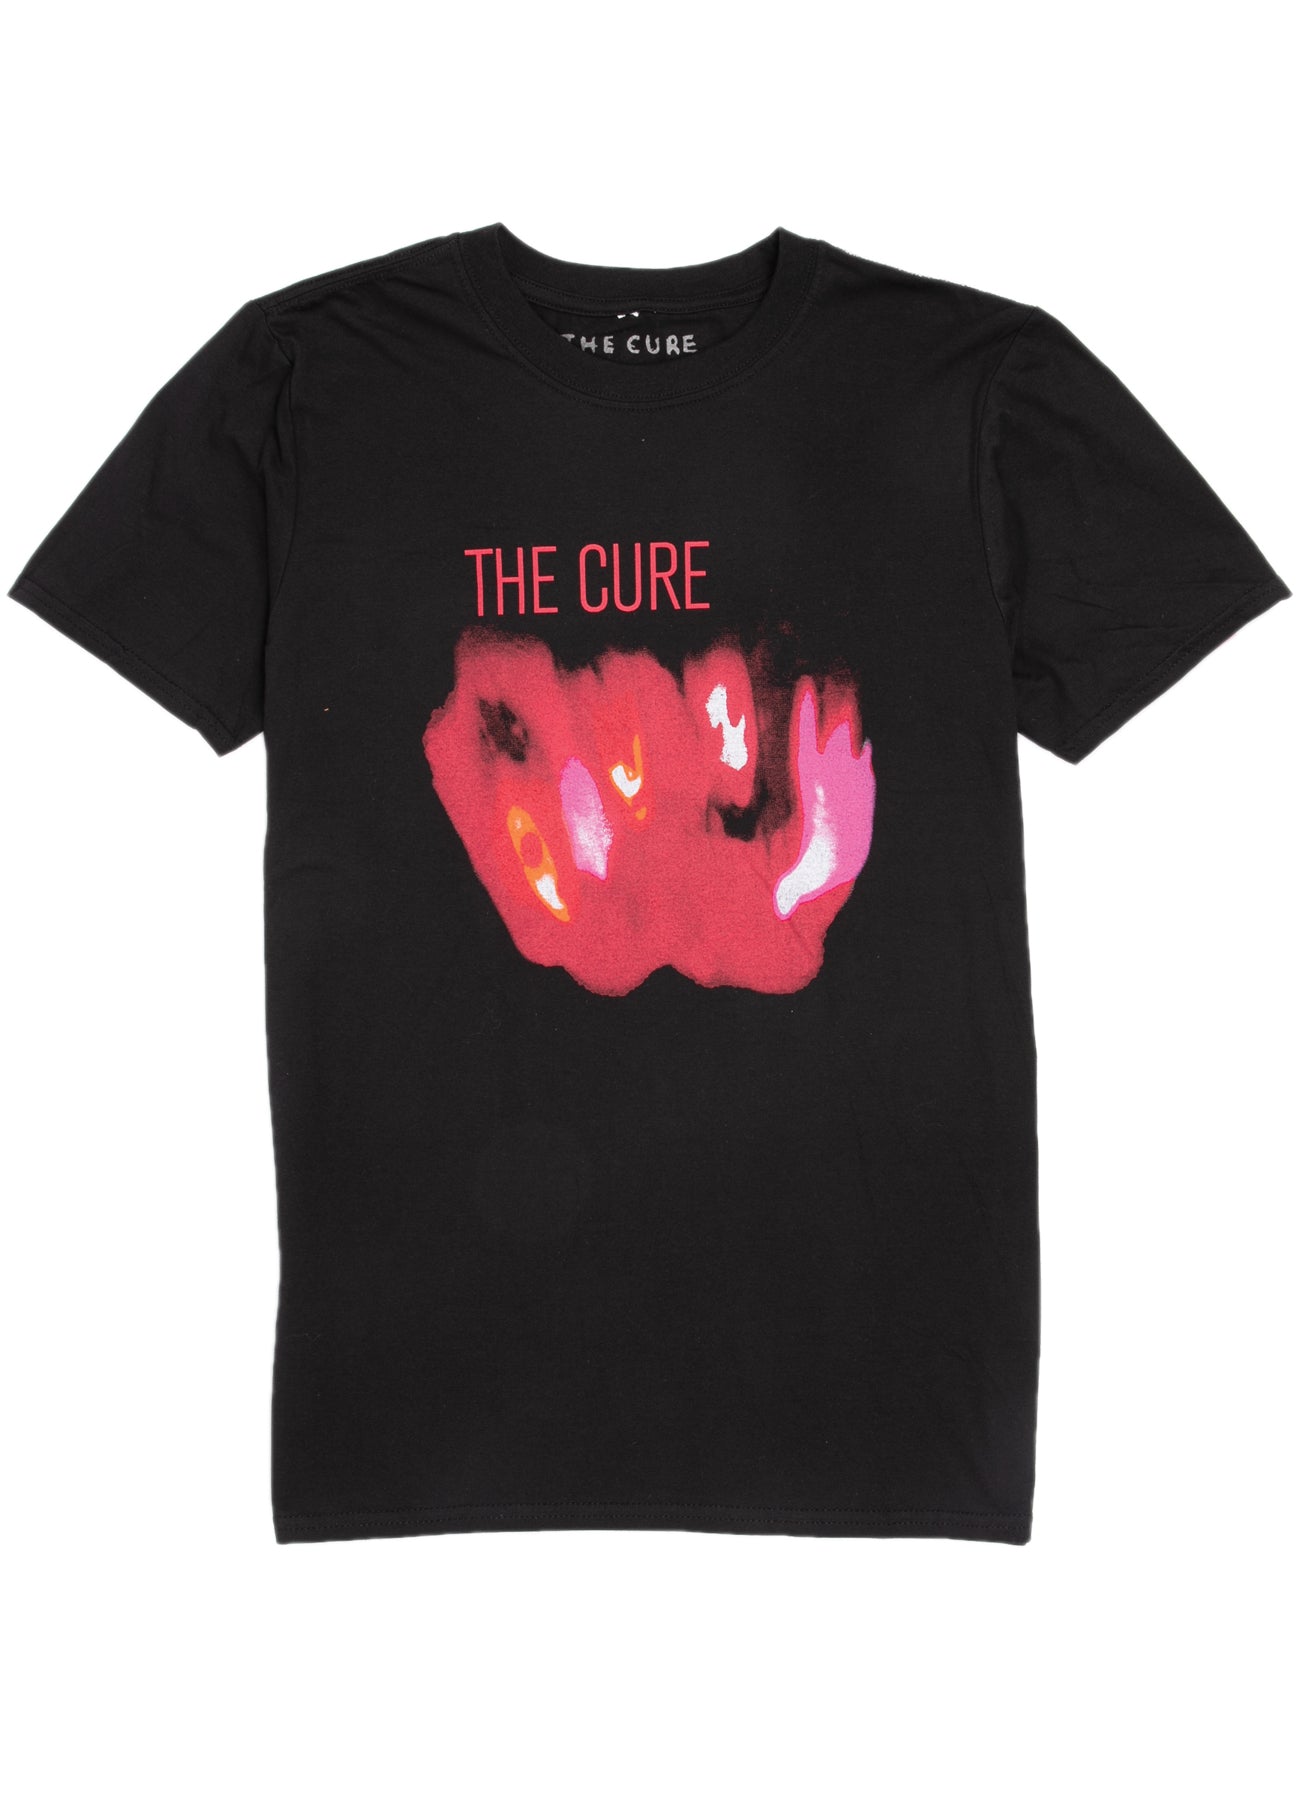 The Cure T-Shirt - Pornography Album - Black – Eye Candy Los Angeles